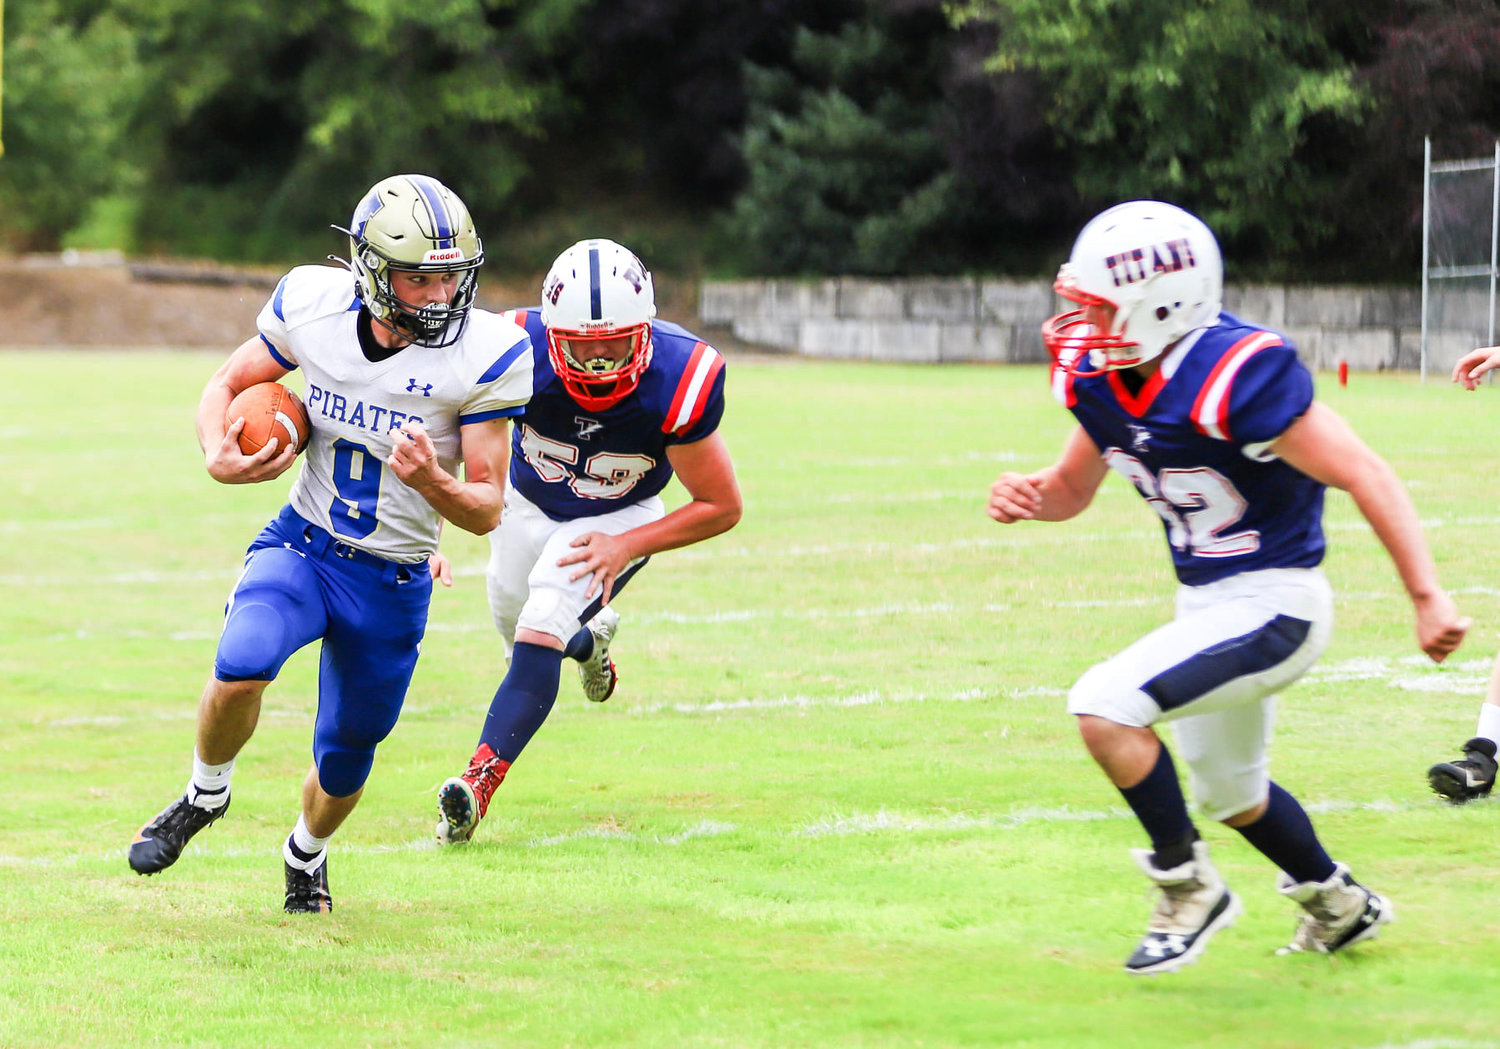 Adna running back Tristan Ridley (9) runs around end against two PWV defenders on Saturday.